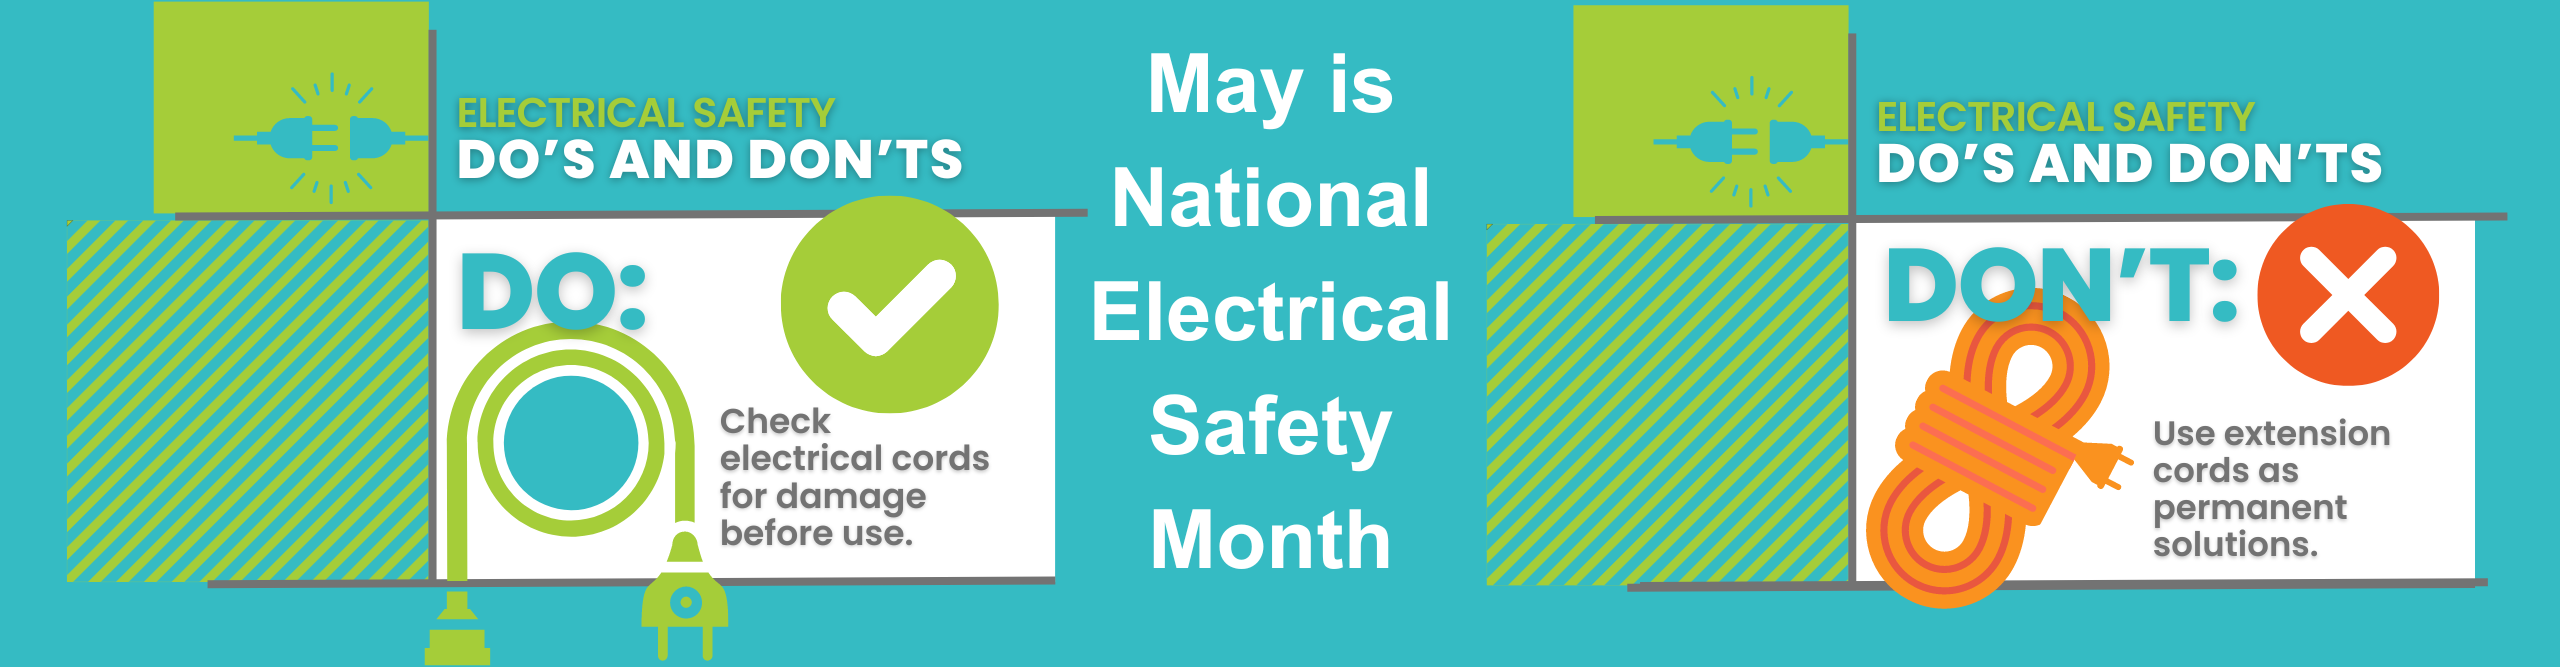 May is electrical safety month